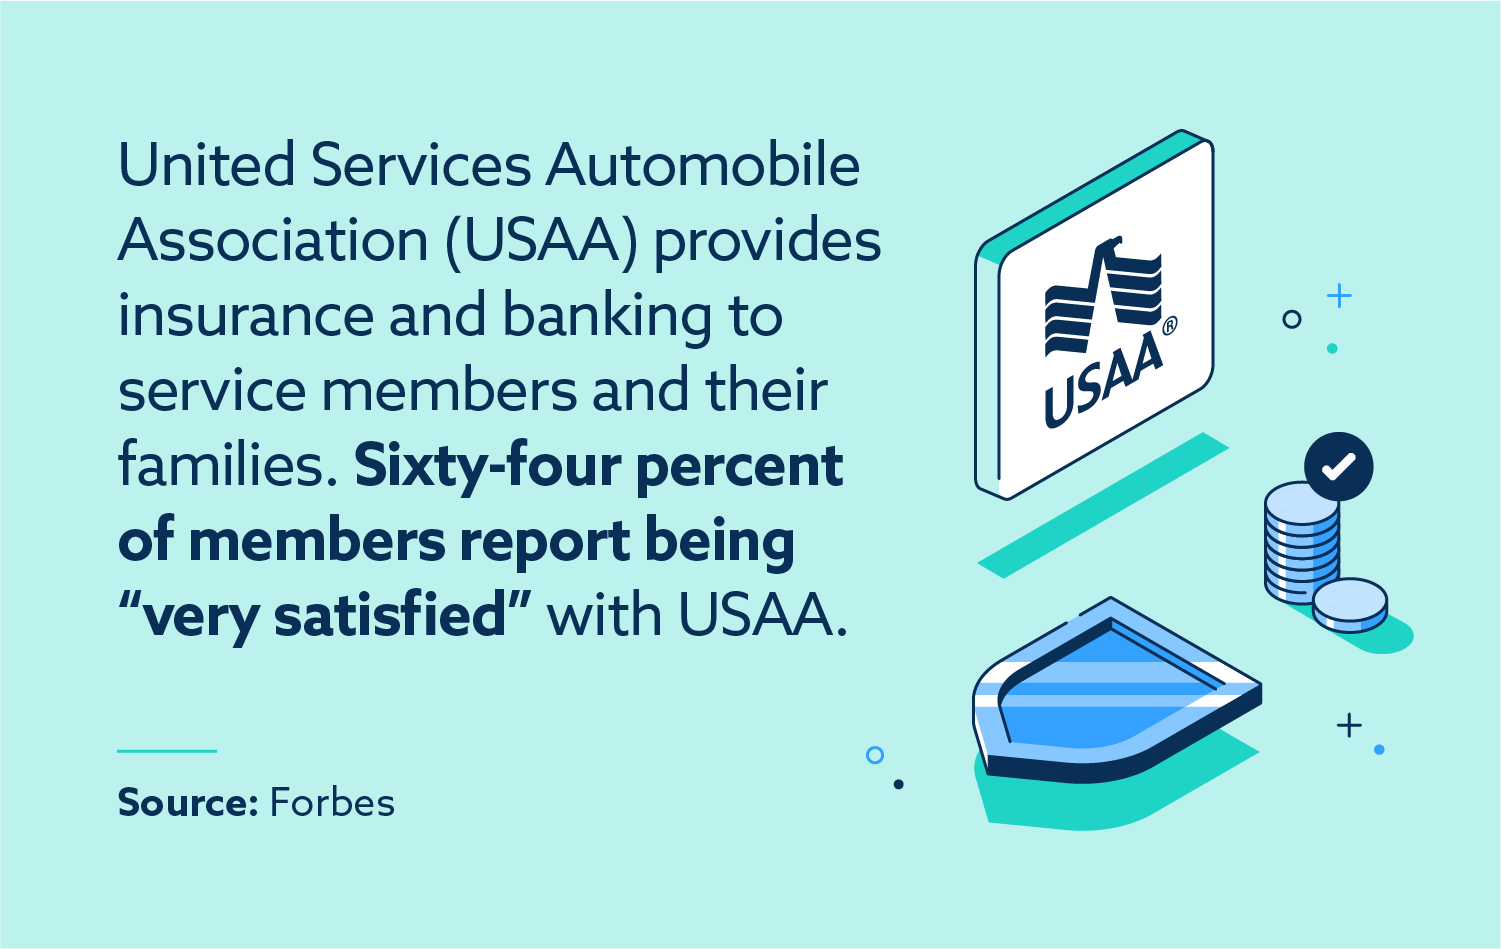 USAA members are satisfied with their services.